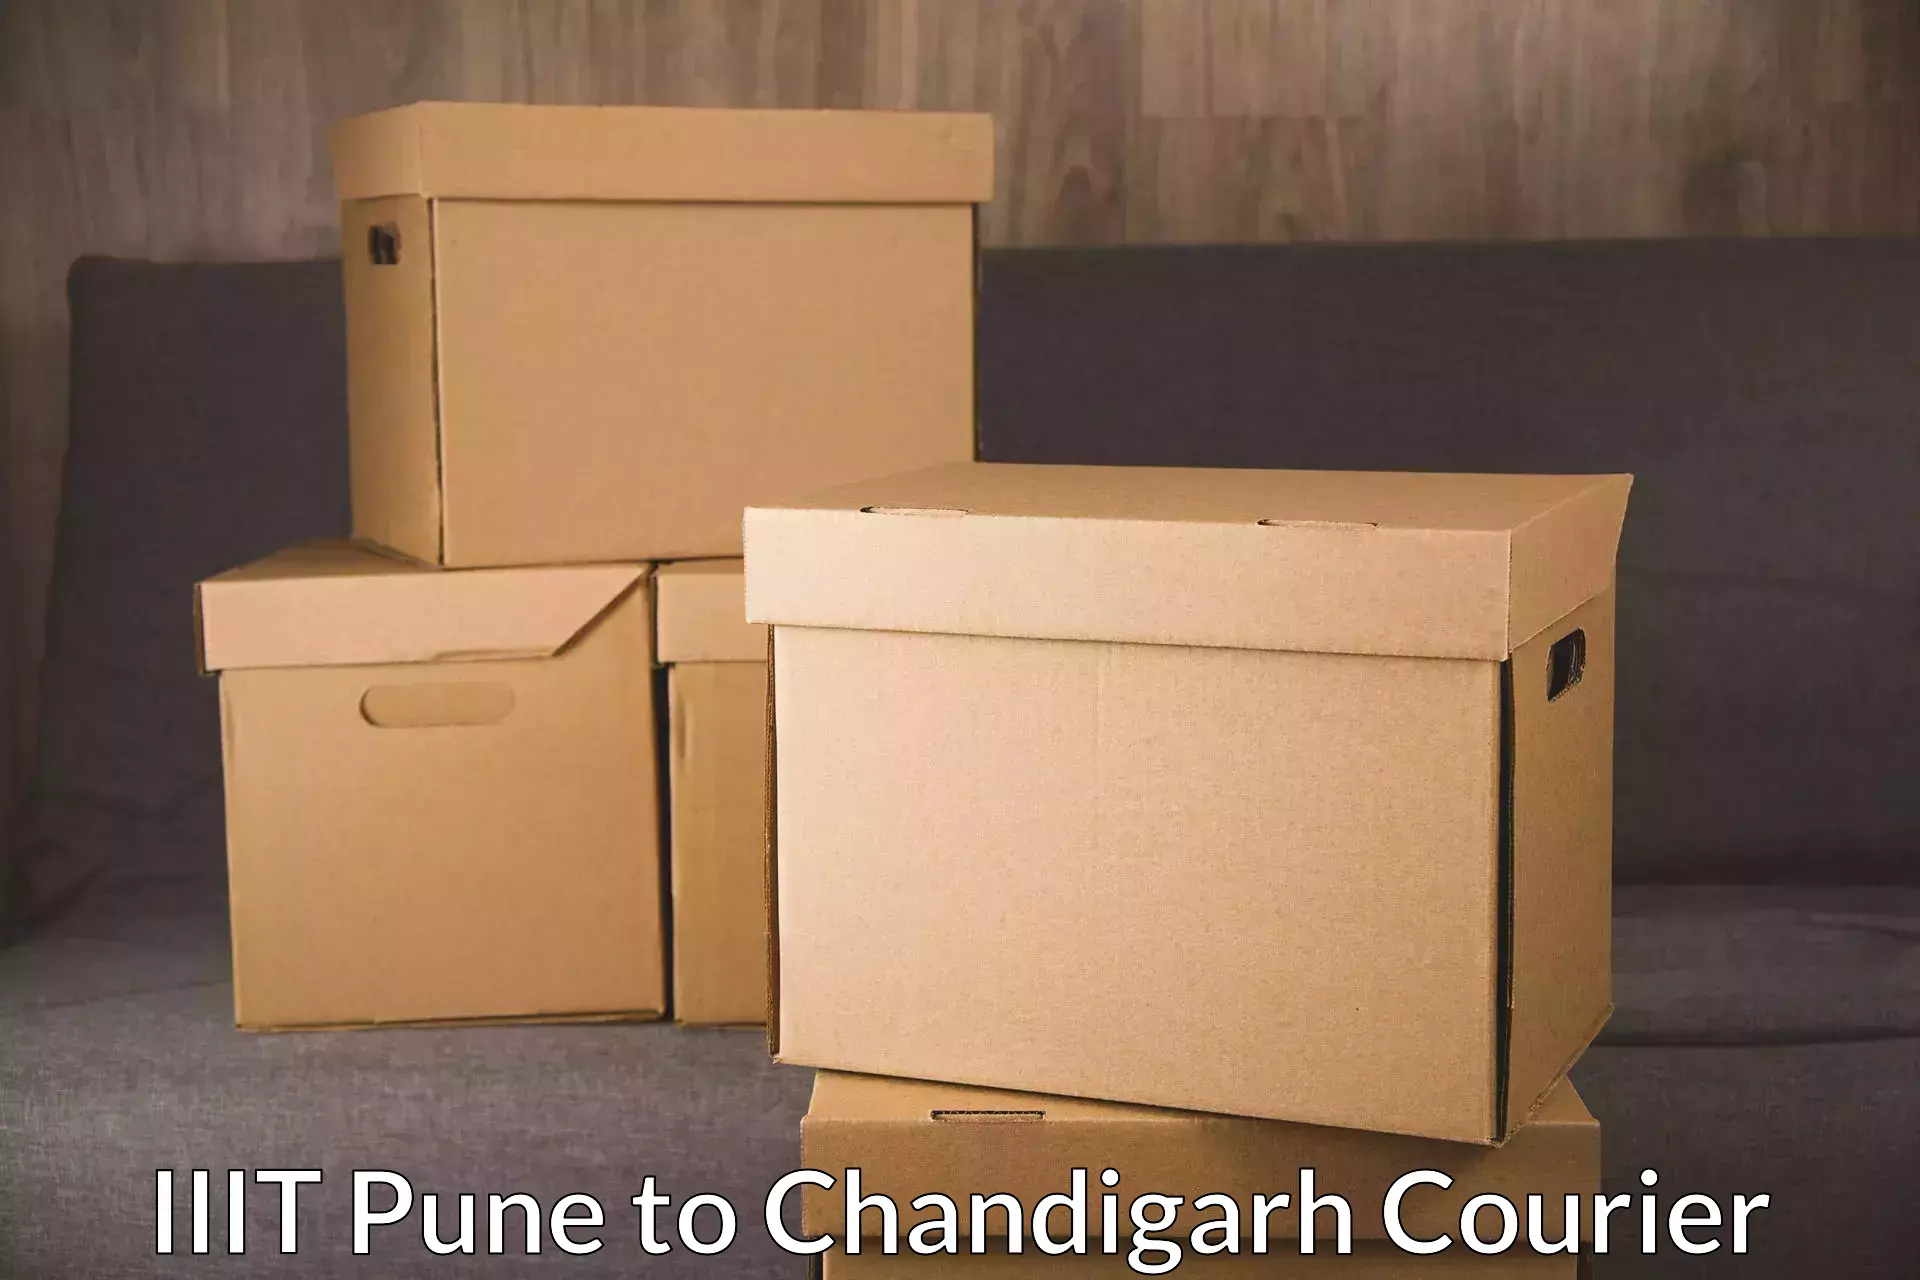 Logistics and distribution in IIIT Pune to Chandigarh